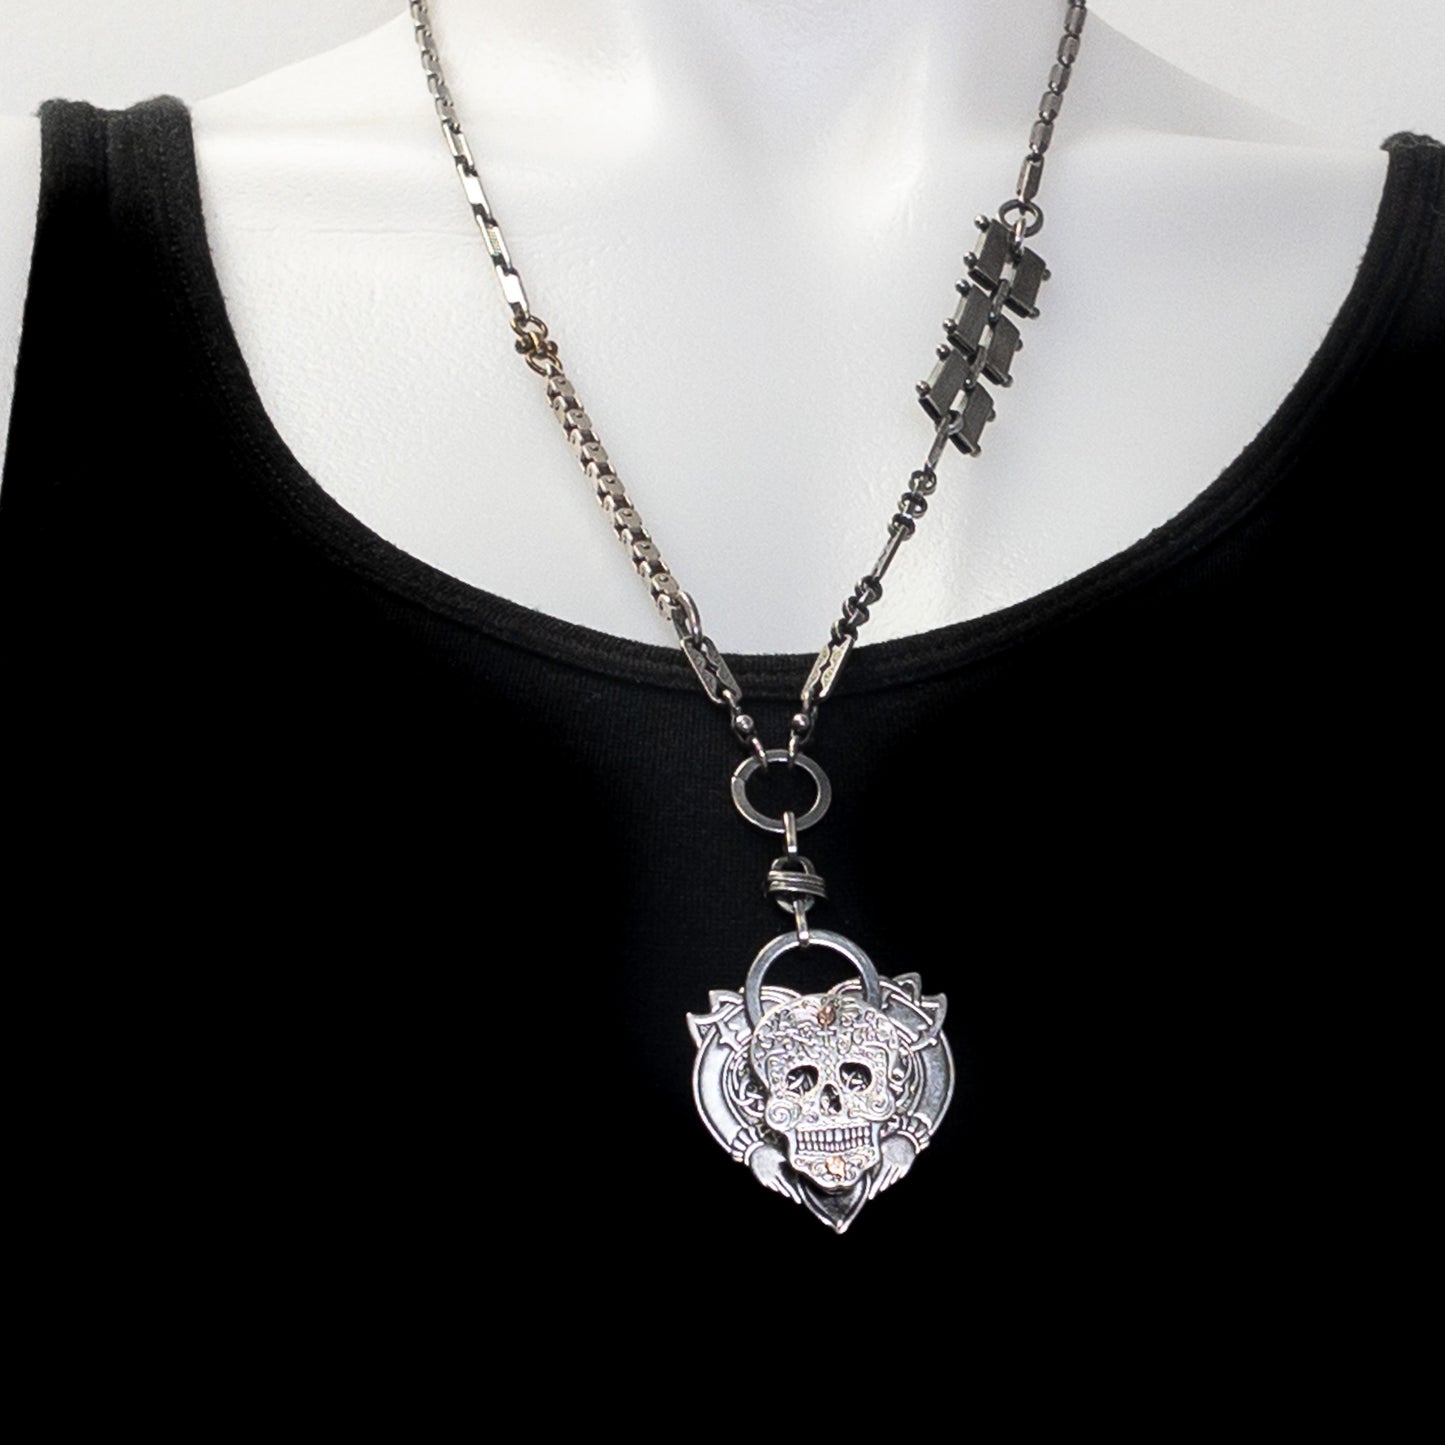 24" Sugar Skull On Claddagh Heart Mixed Metal Necklace - 1 pc.-The Bead Gallery Honolulu